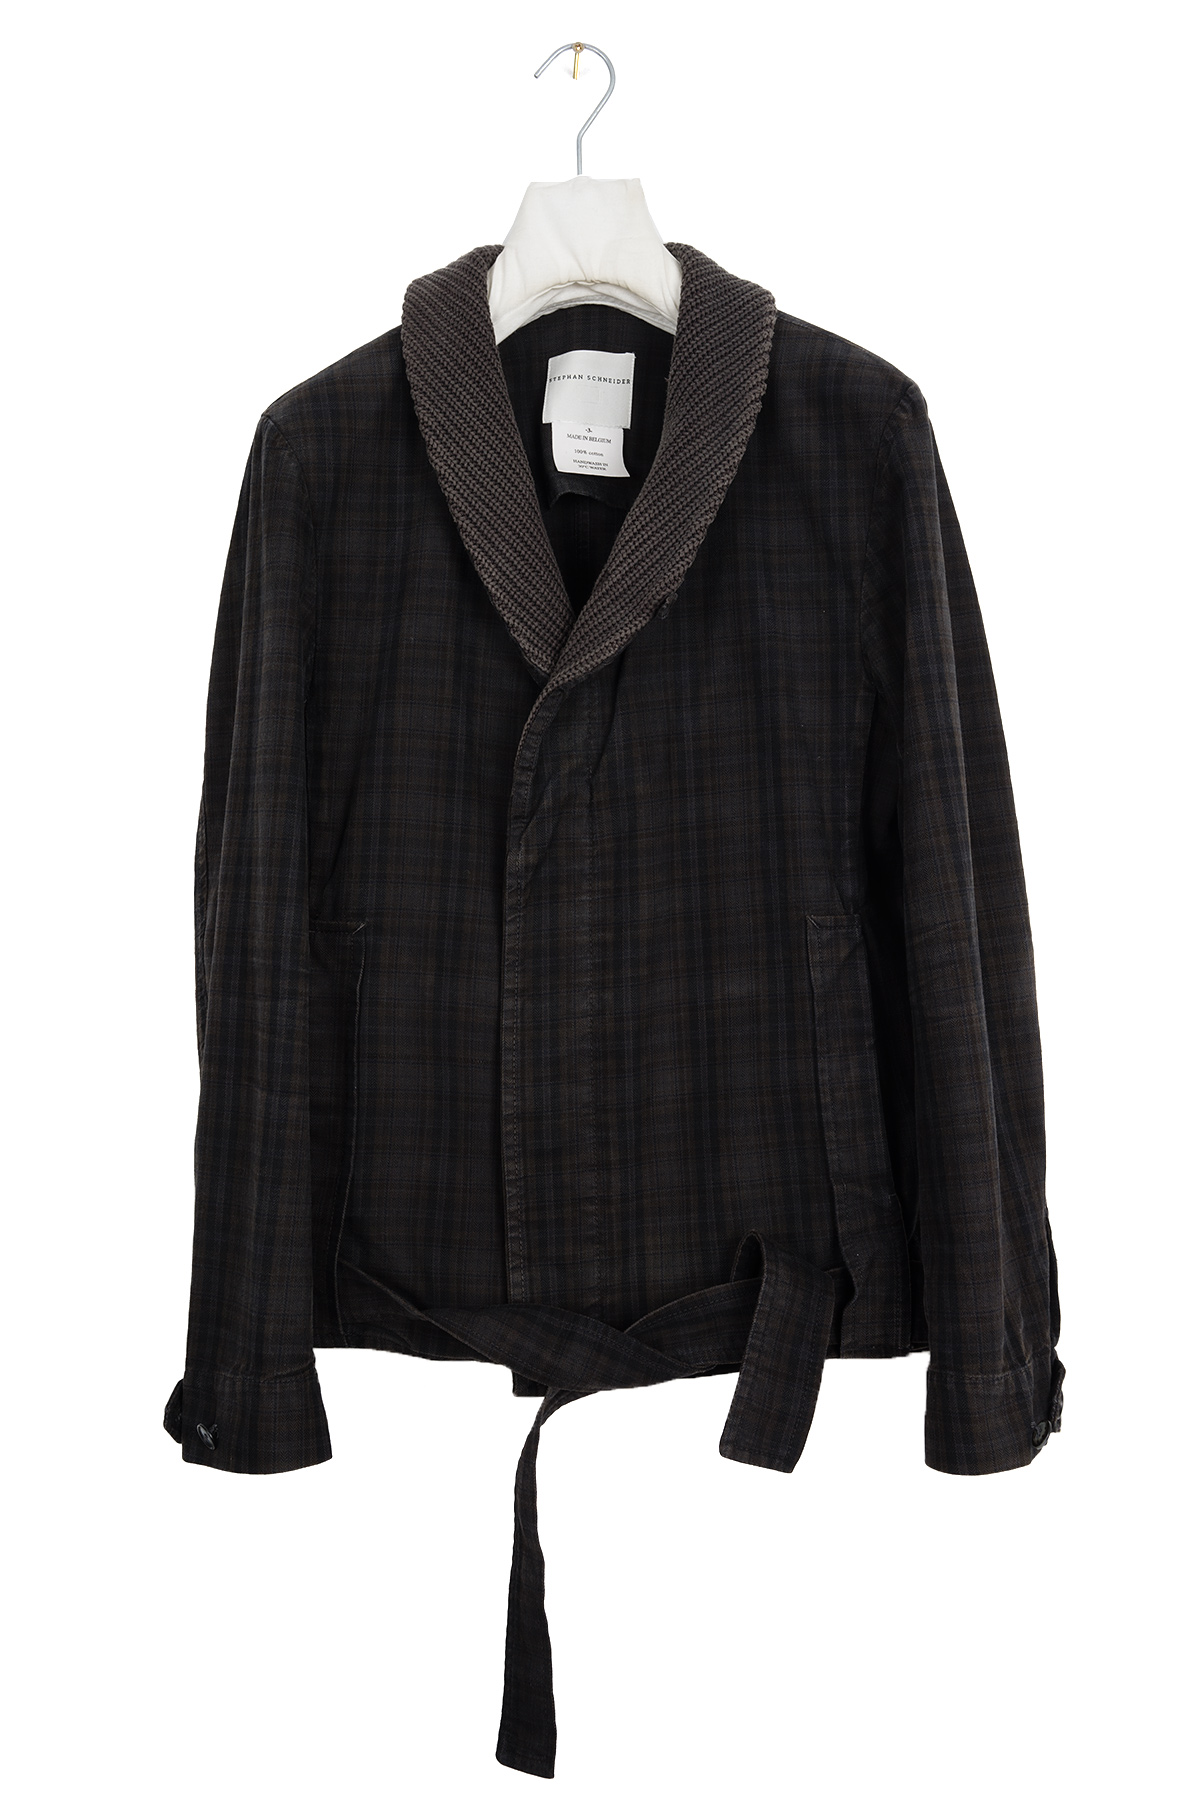 2006 A/W SHAWL COLLAR JACKET IN OVERDYED COTTON - 4